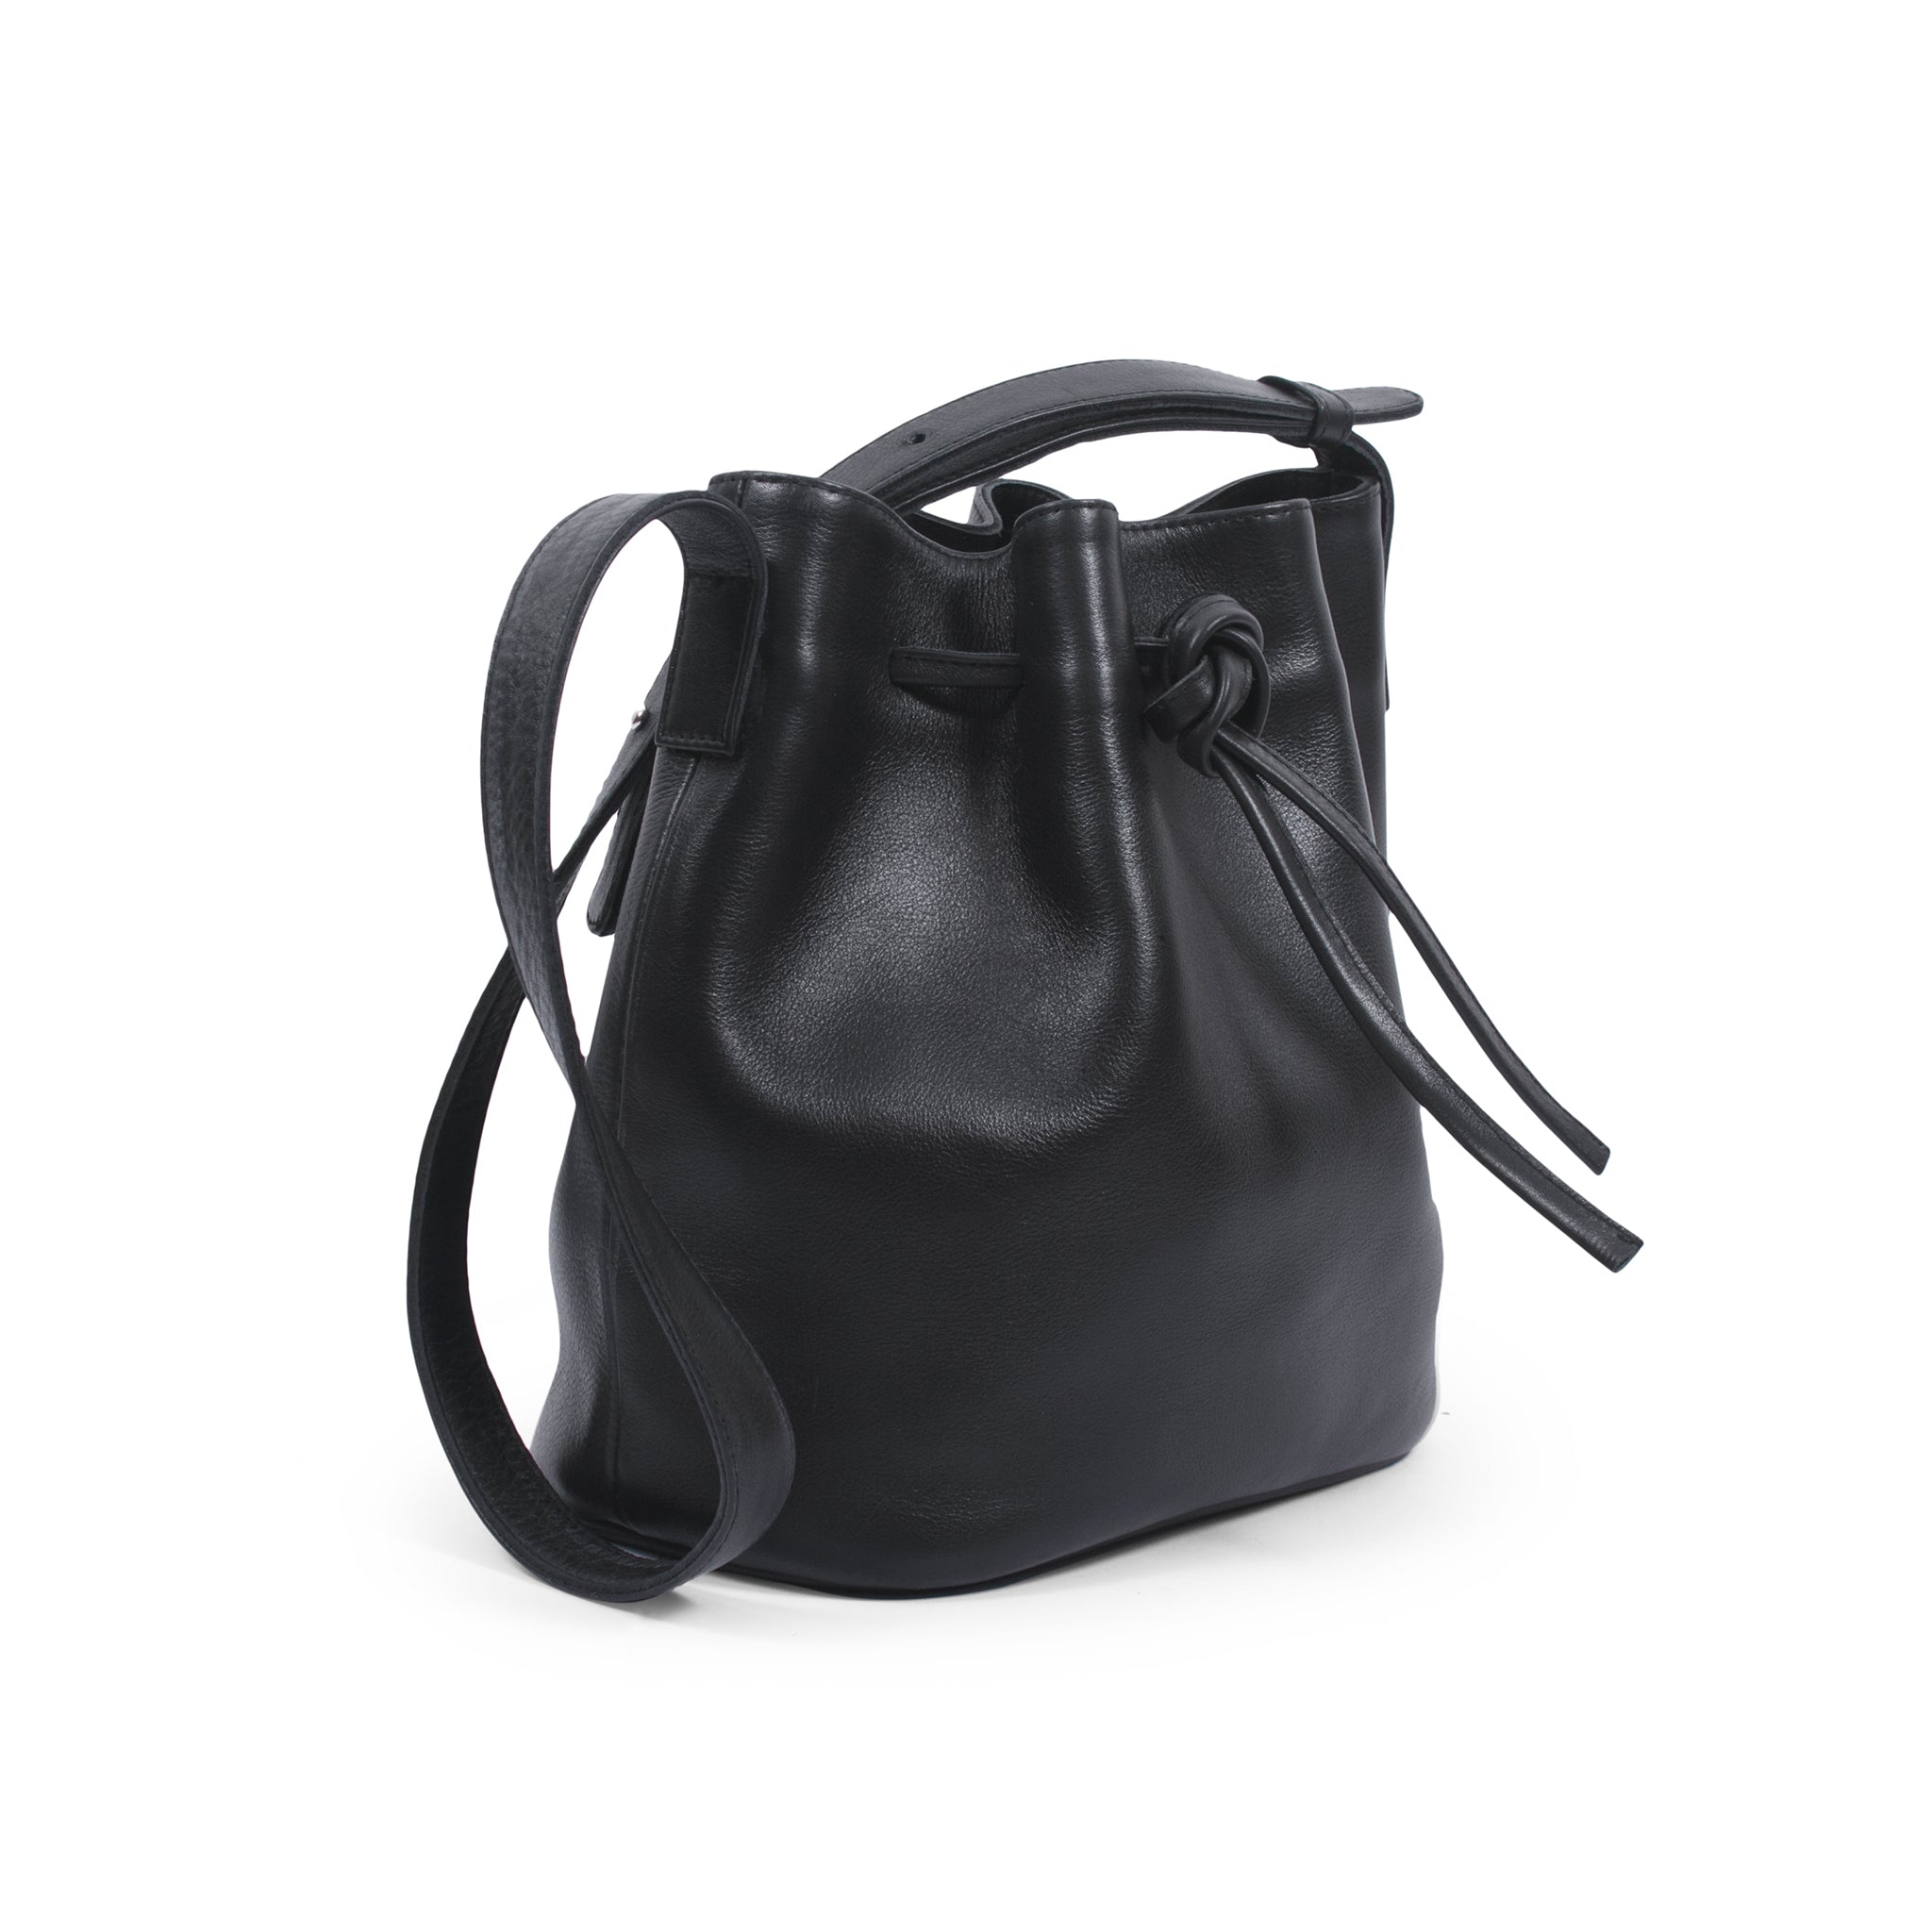 Lacy Bag-Large Leather Bucket Bag